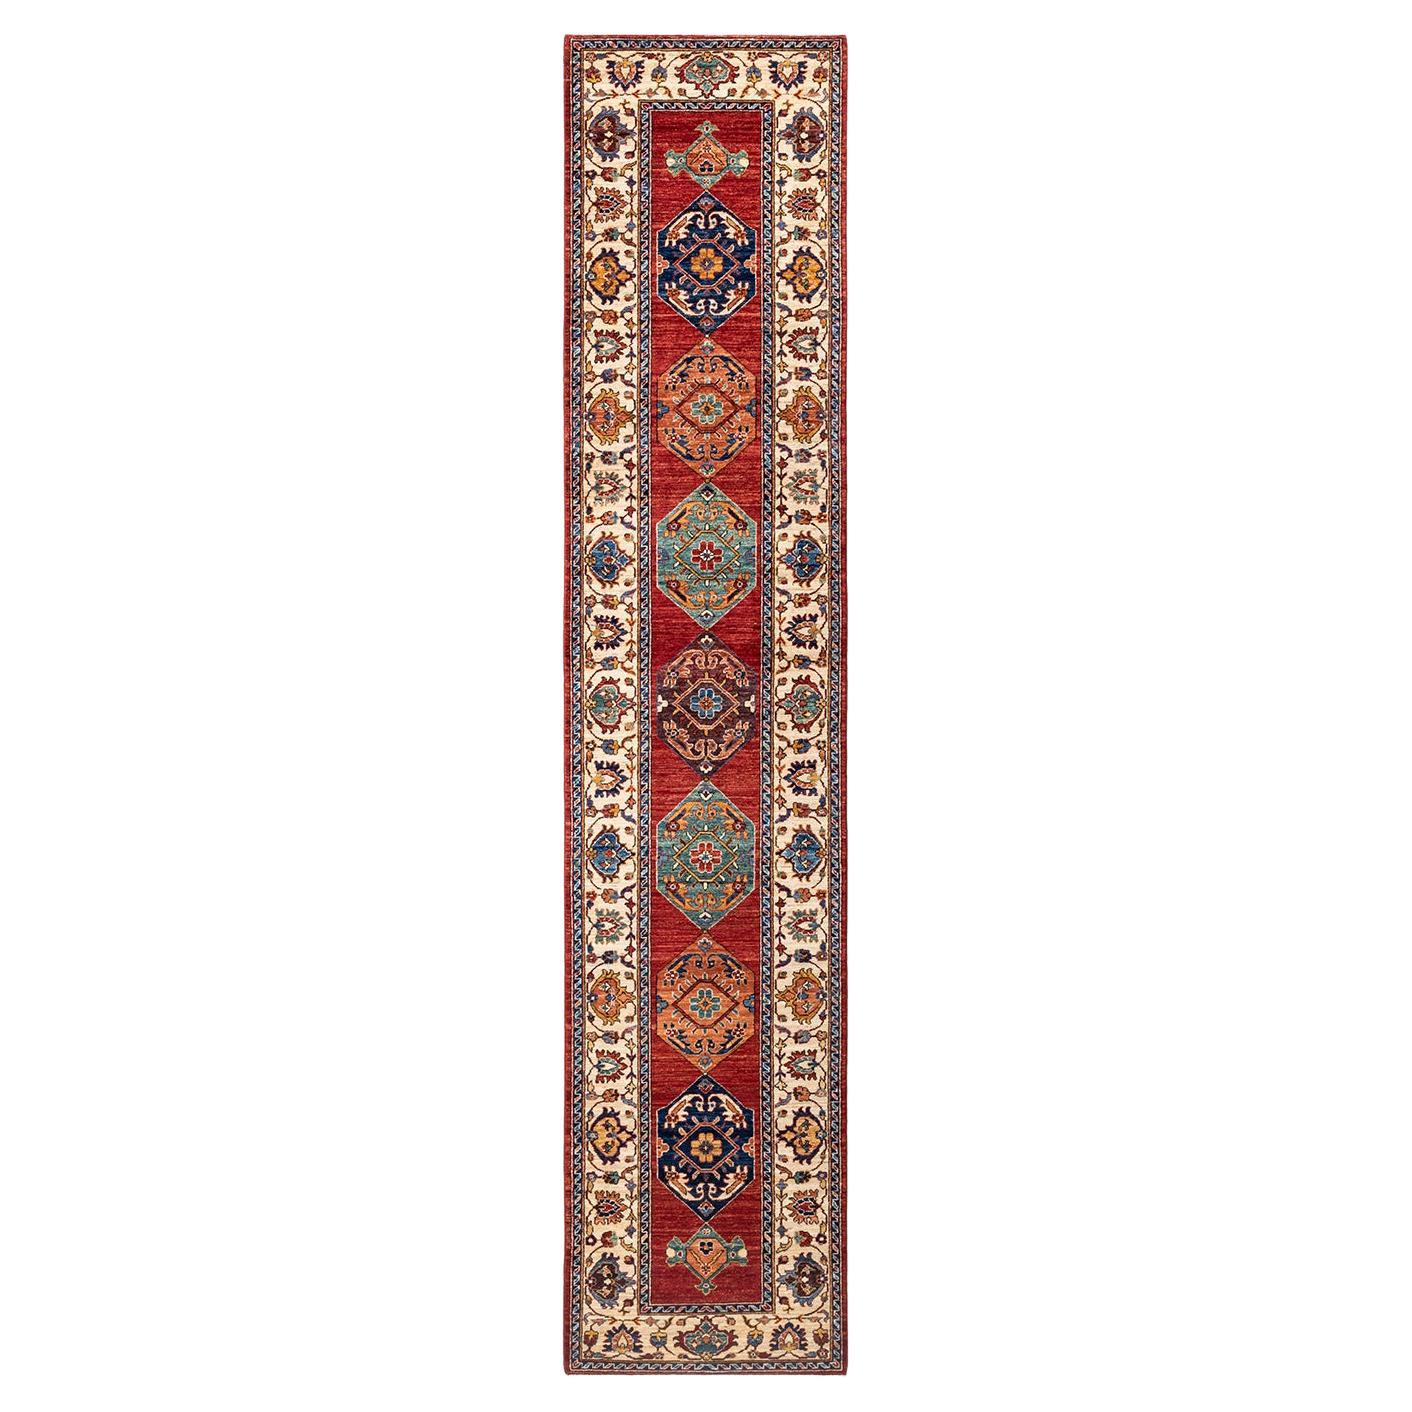 Serapi, One-of-a-Kind Hand-Knotted Runner Rug, Blue